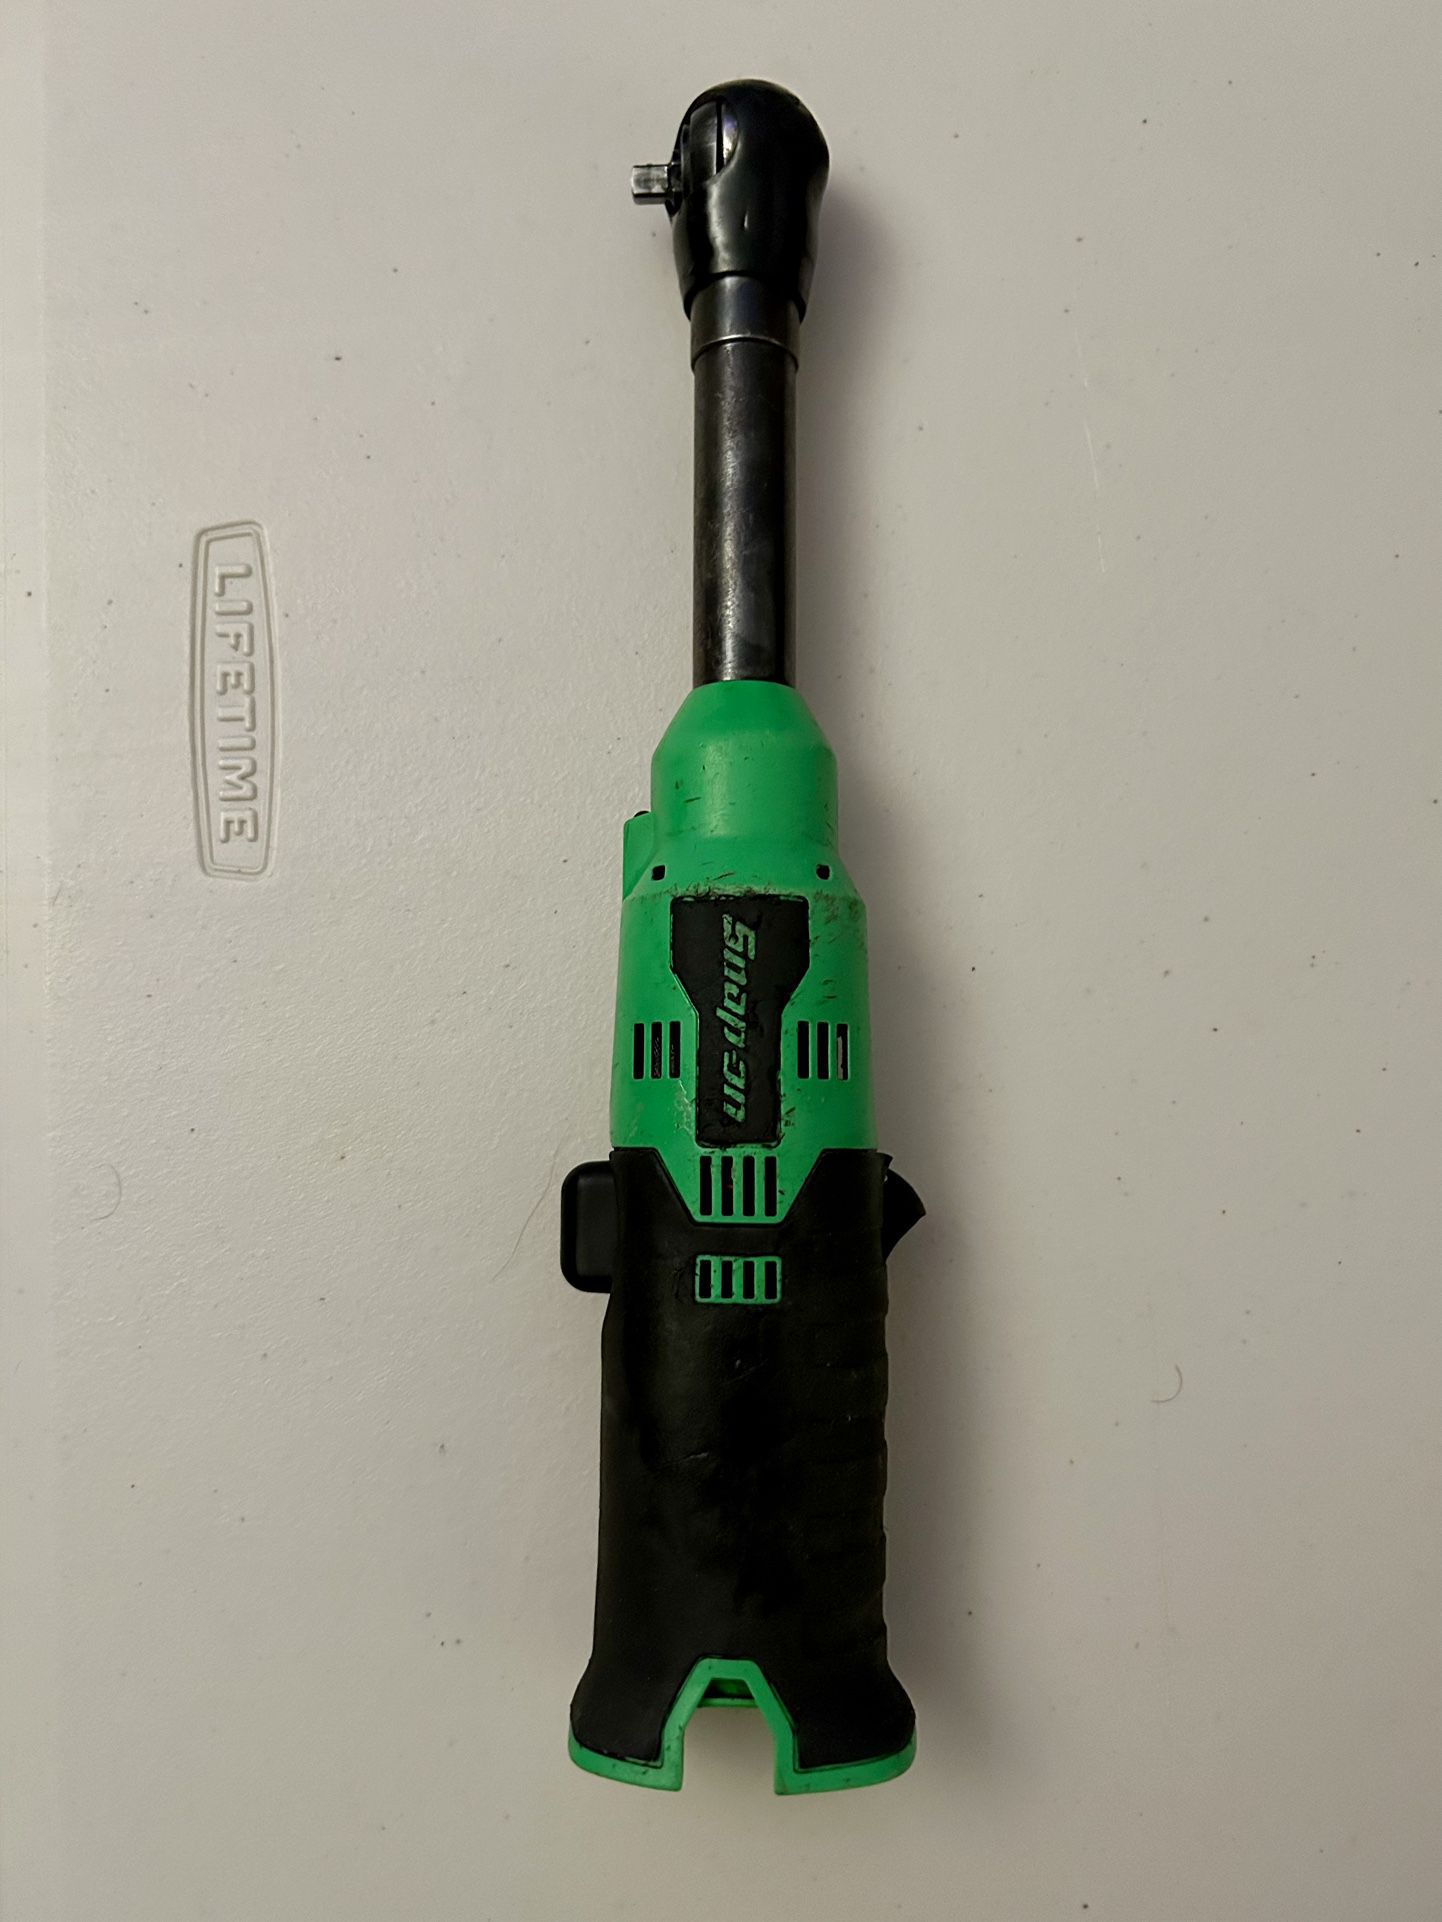 Snap on 14.4 V 1/4" Drive MicroLithium Cordless Long-Neck Ratchet (Tool Only) (Green)